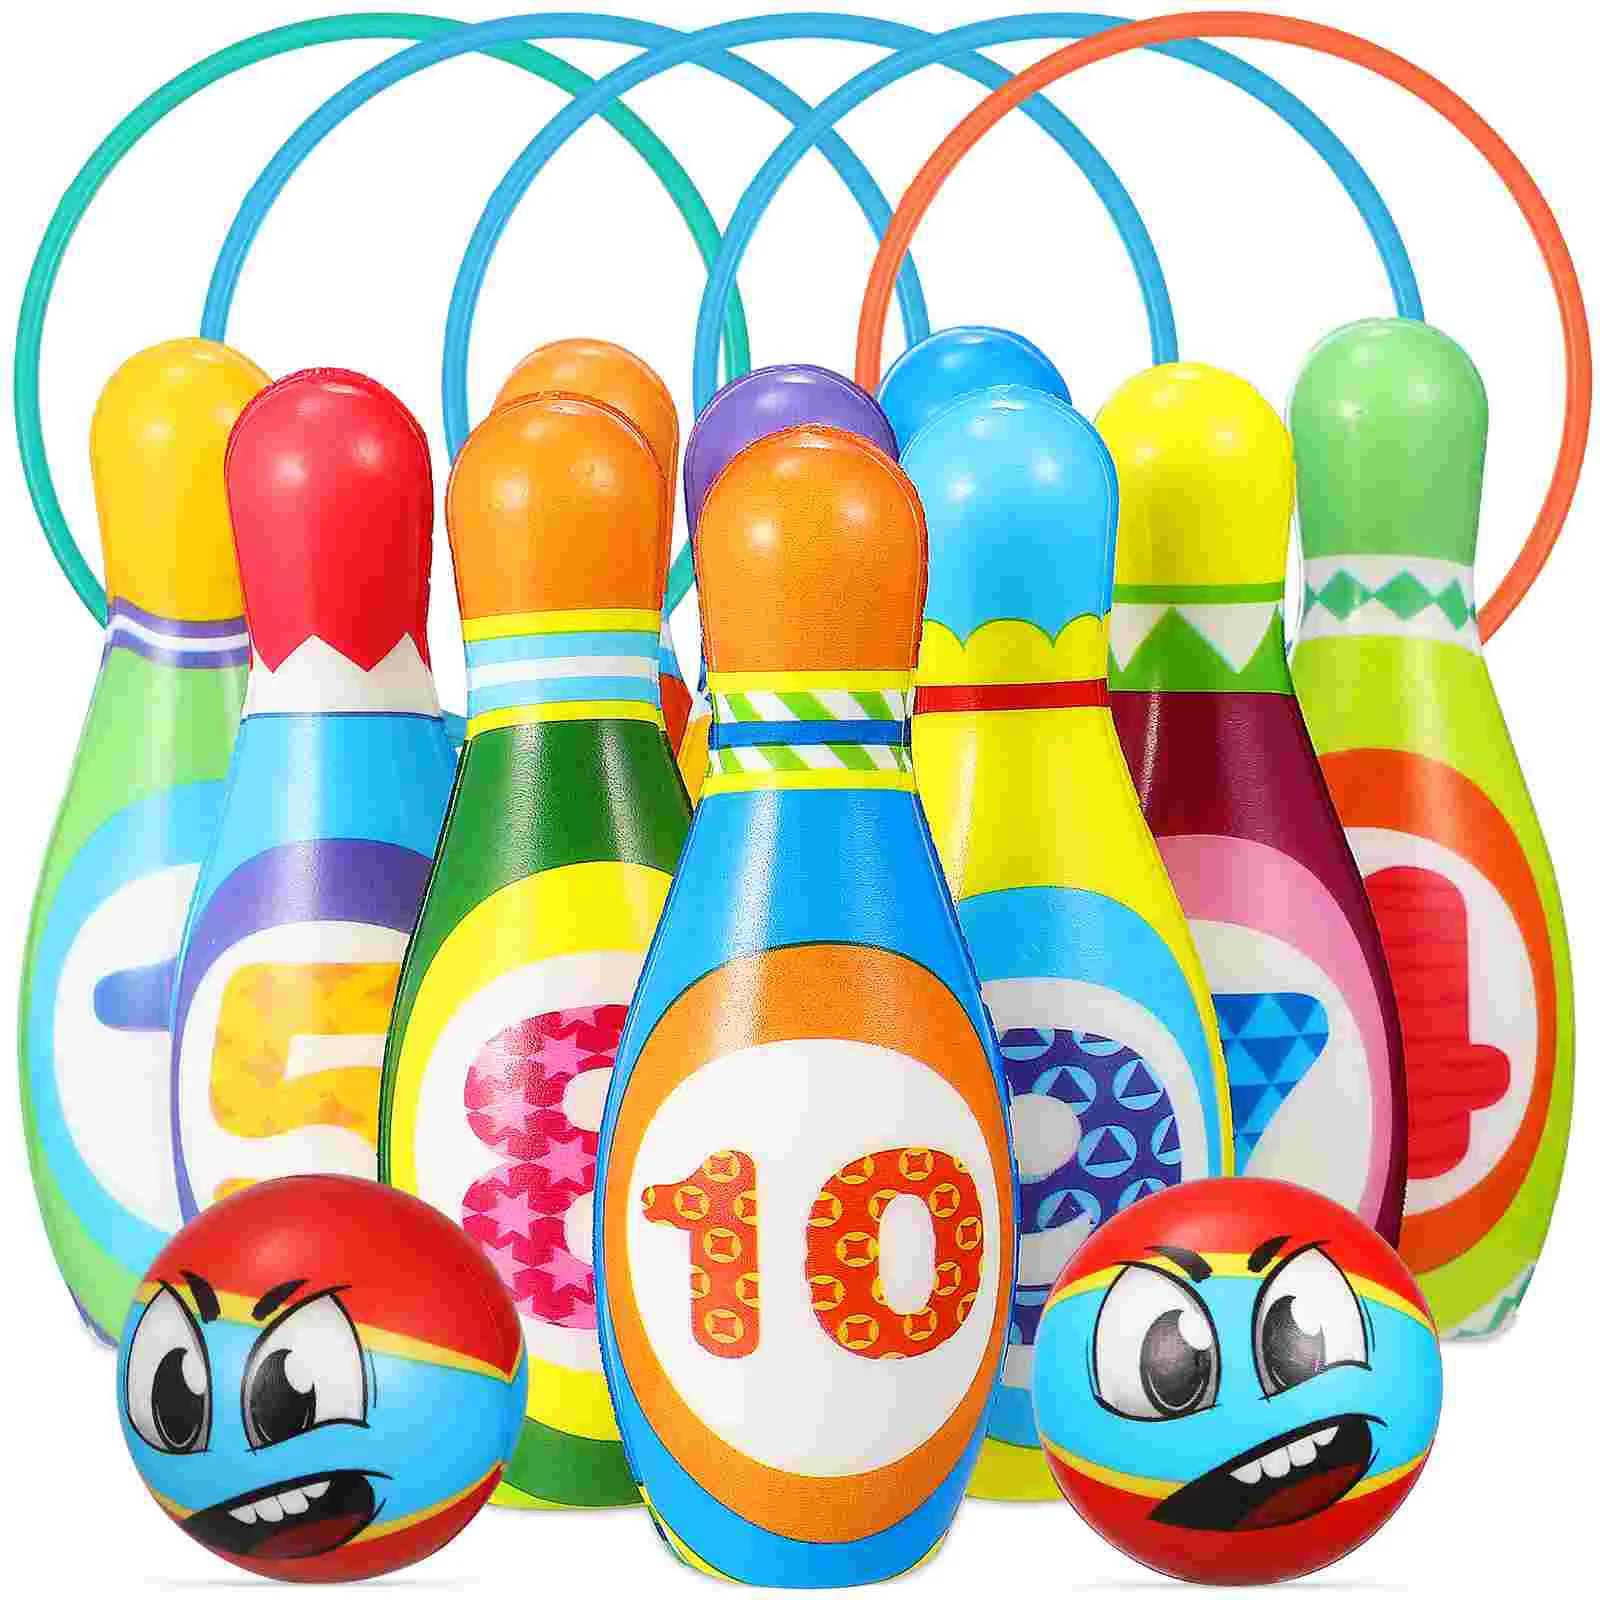 

Kids Bowling Toys Sets Bowling Pins And Balls Fun Safe PU Educational Games For Toddlers Children Outdoor Indoor Sports